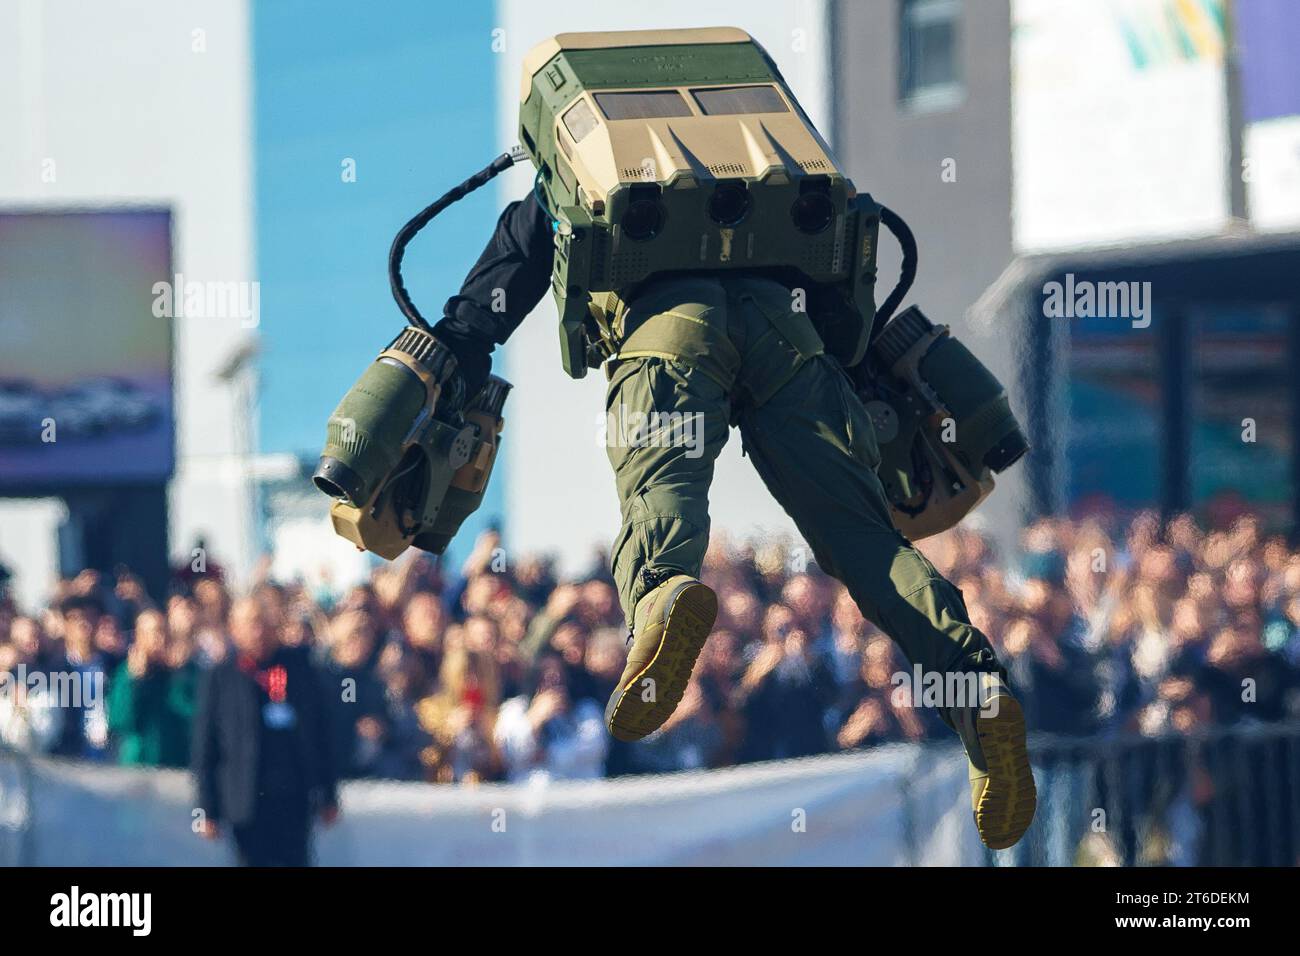 Bucharest, Romania. 9th Nov, 2023: British entrepreneur and inventor Richard Browning flying in his MK3 jet suit prototype during GoTech World, the largest IT & Digital expo-conference in Central and Eastern Europe, at ROMEXPO Exhibition Center in Bucharest. Credit: Lucian Alecu/Alamy Live News Stock Photo